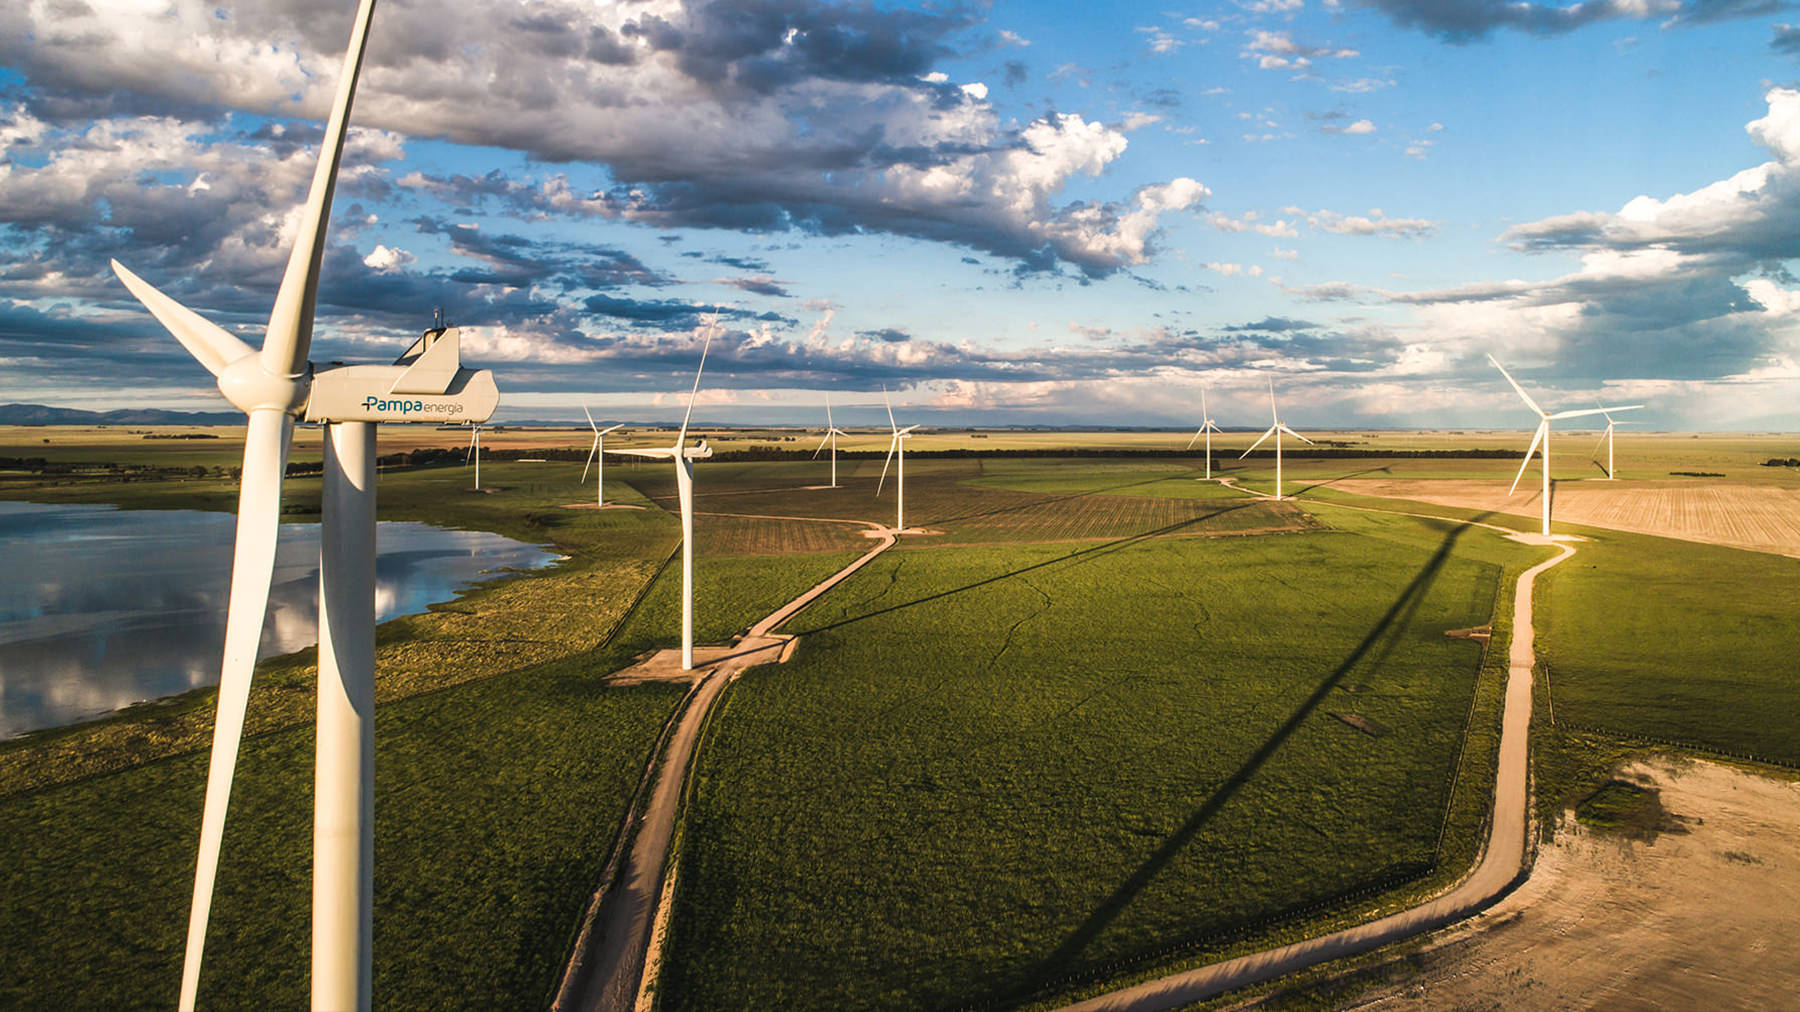 DNEST autonomous drone and FlytNow for Pampa Energia’s power plant inspection in Argentina